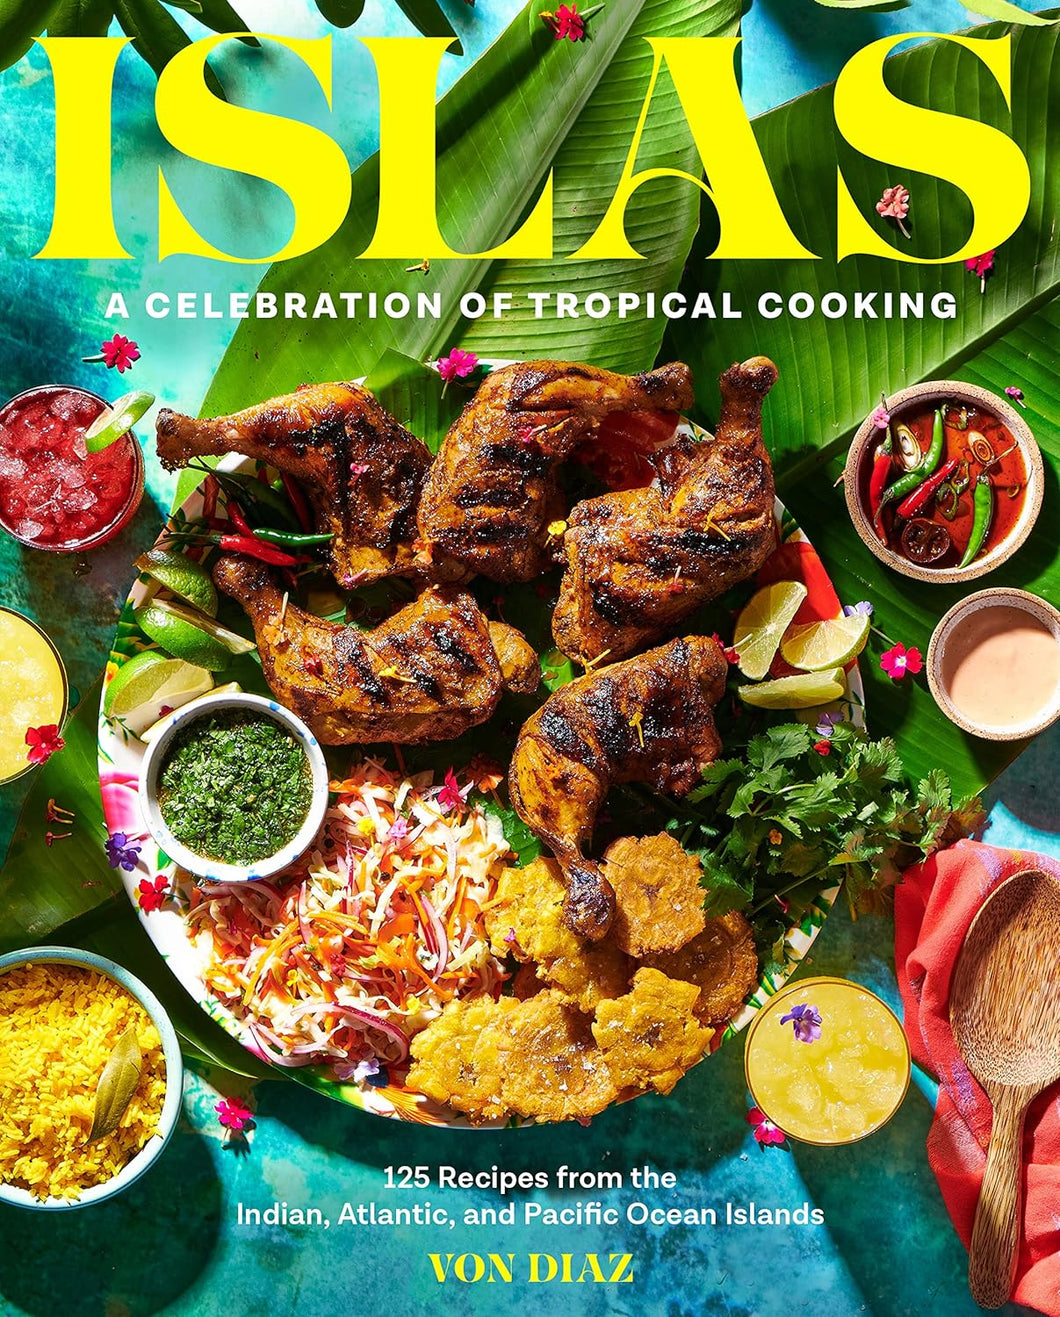 THUR JUN 13 / ISLAS: A Celebration of Tropical Cooking with author Von Diaz and moderator Woldy Kusina